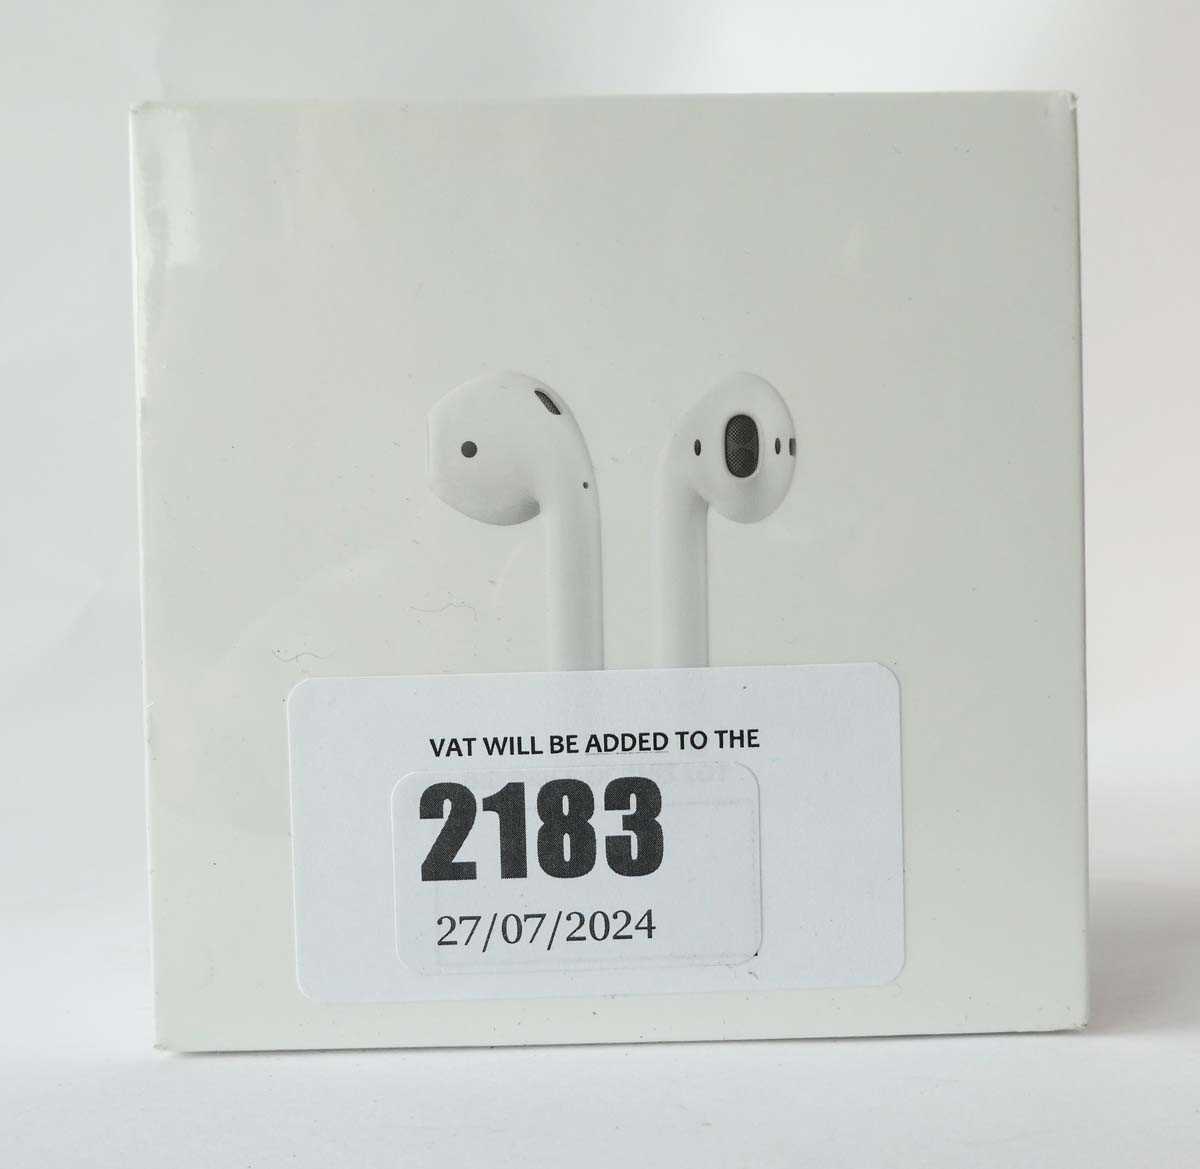 Lot 2183 - *Sealed* AirPods 1st Gen